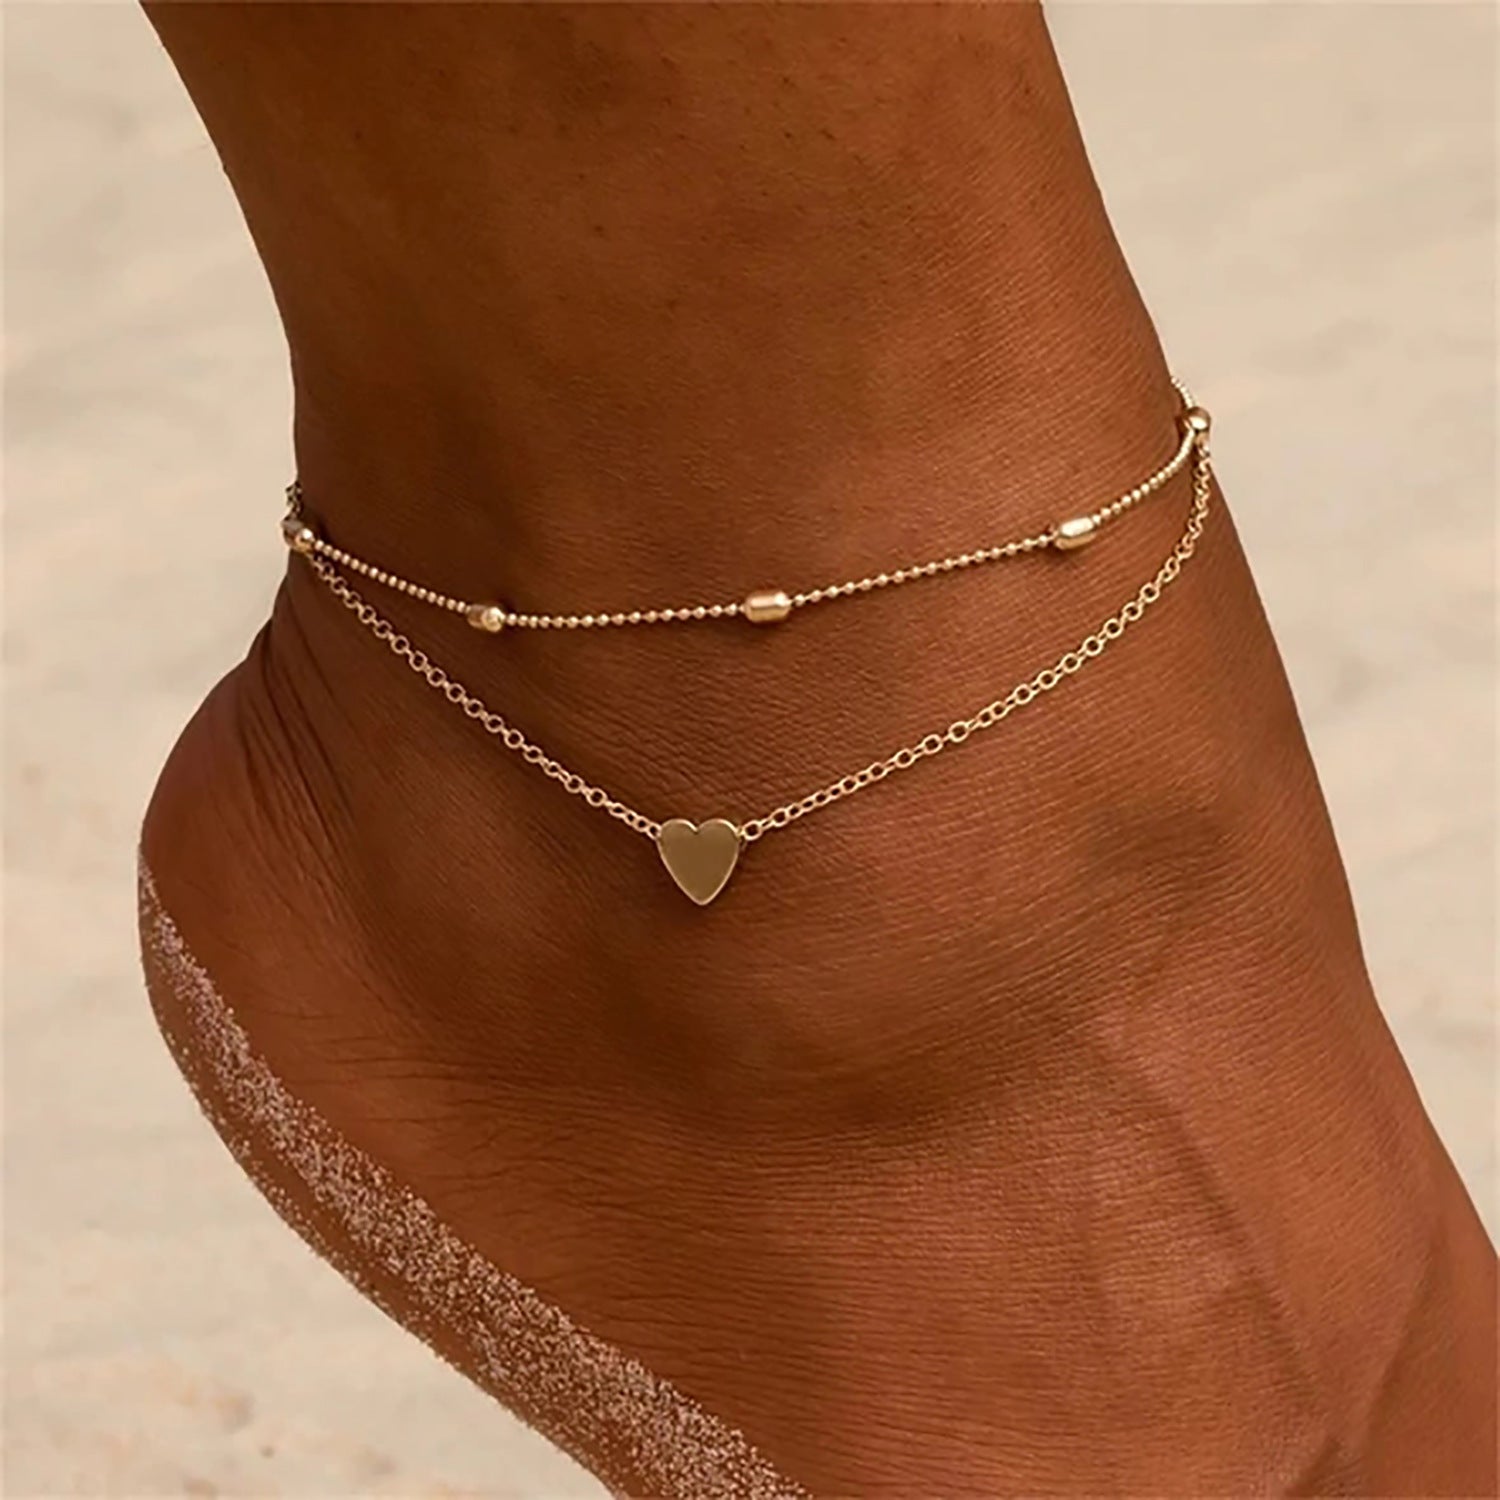 2 In 1 Gold Leg Chain-Anklet